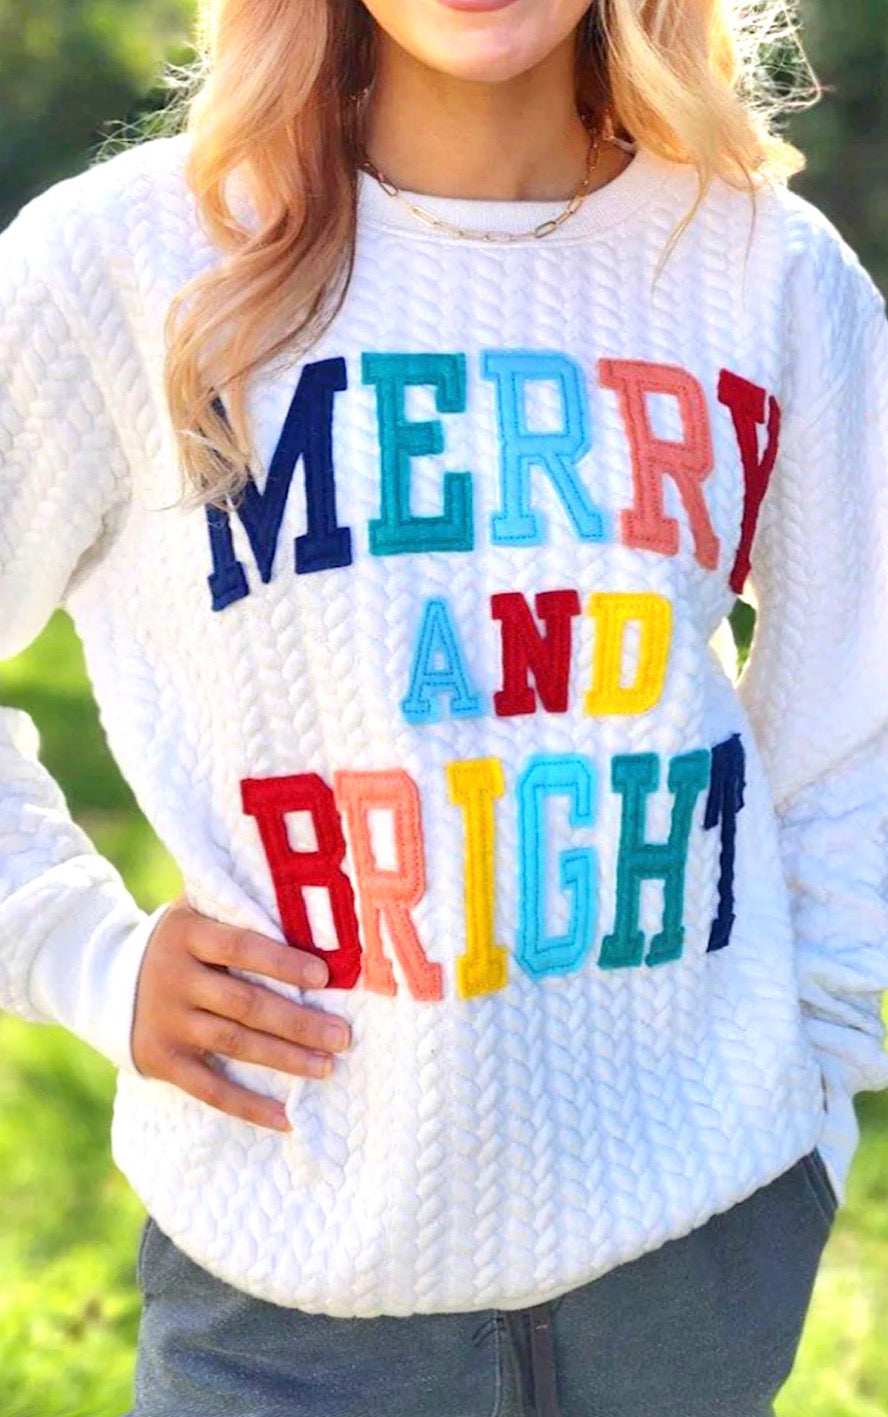 PREORDER Merry And Bright White Quilted Sweatshirt, SHIPS 12/15